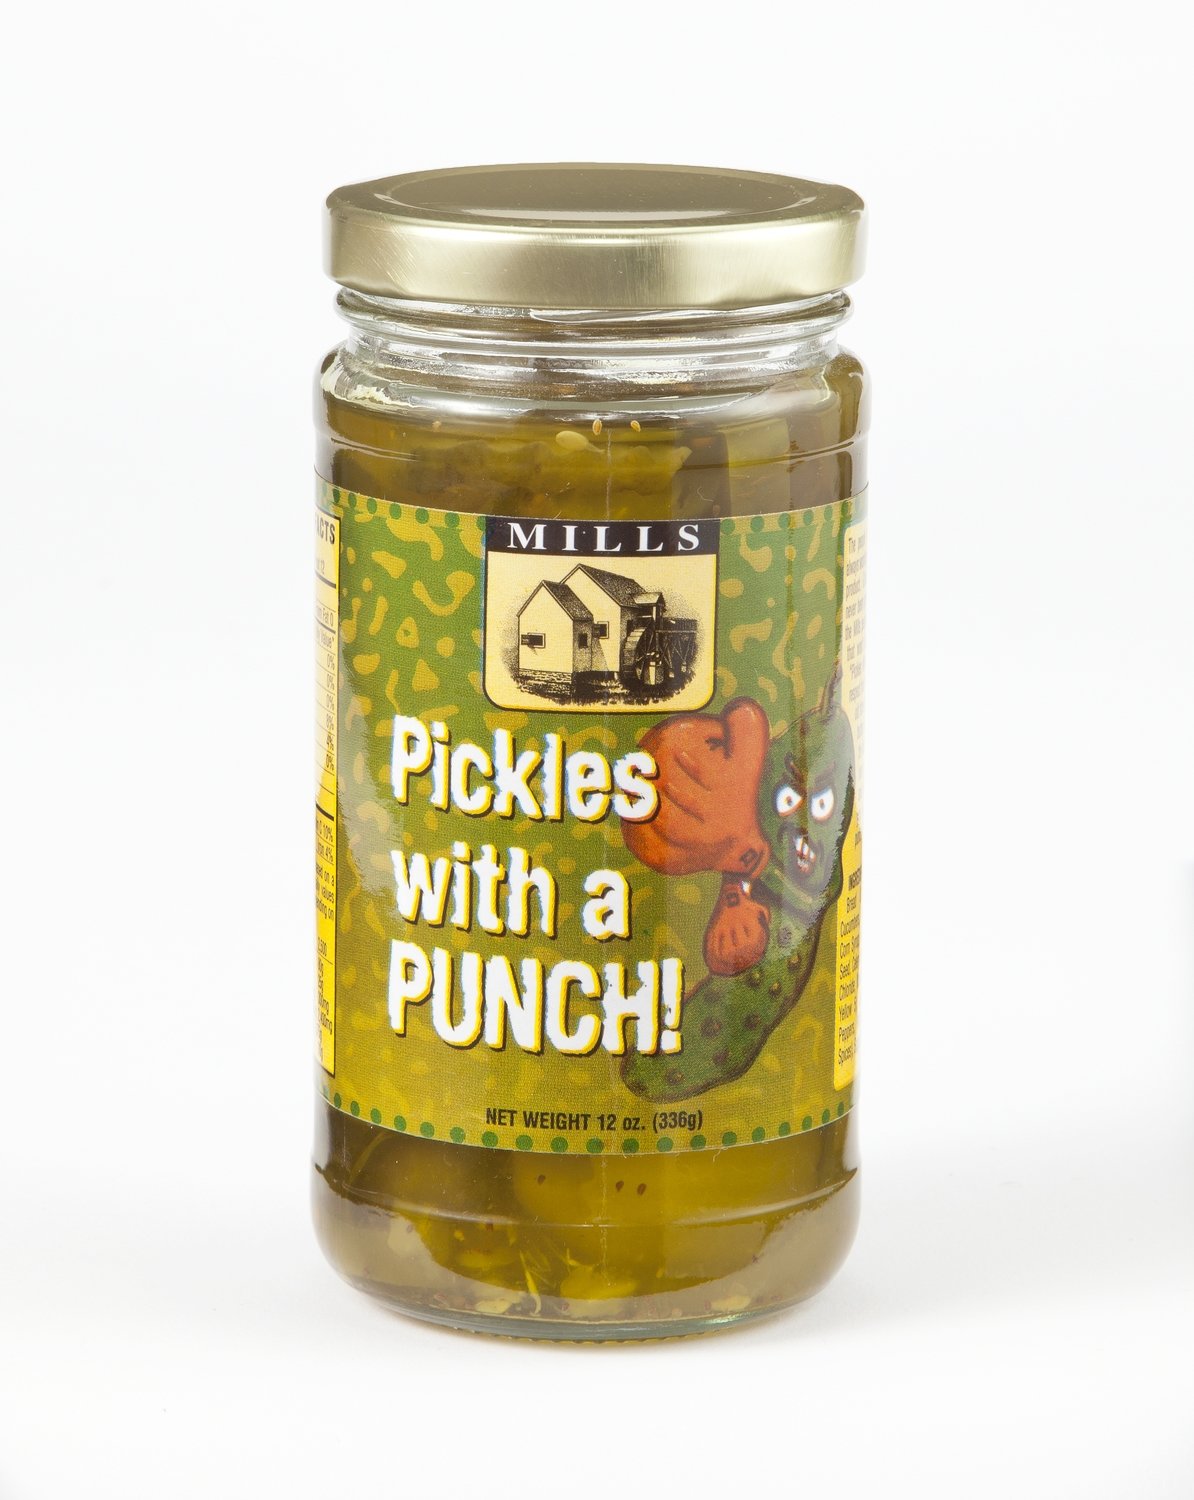 Pickles with a Punch!